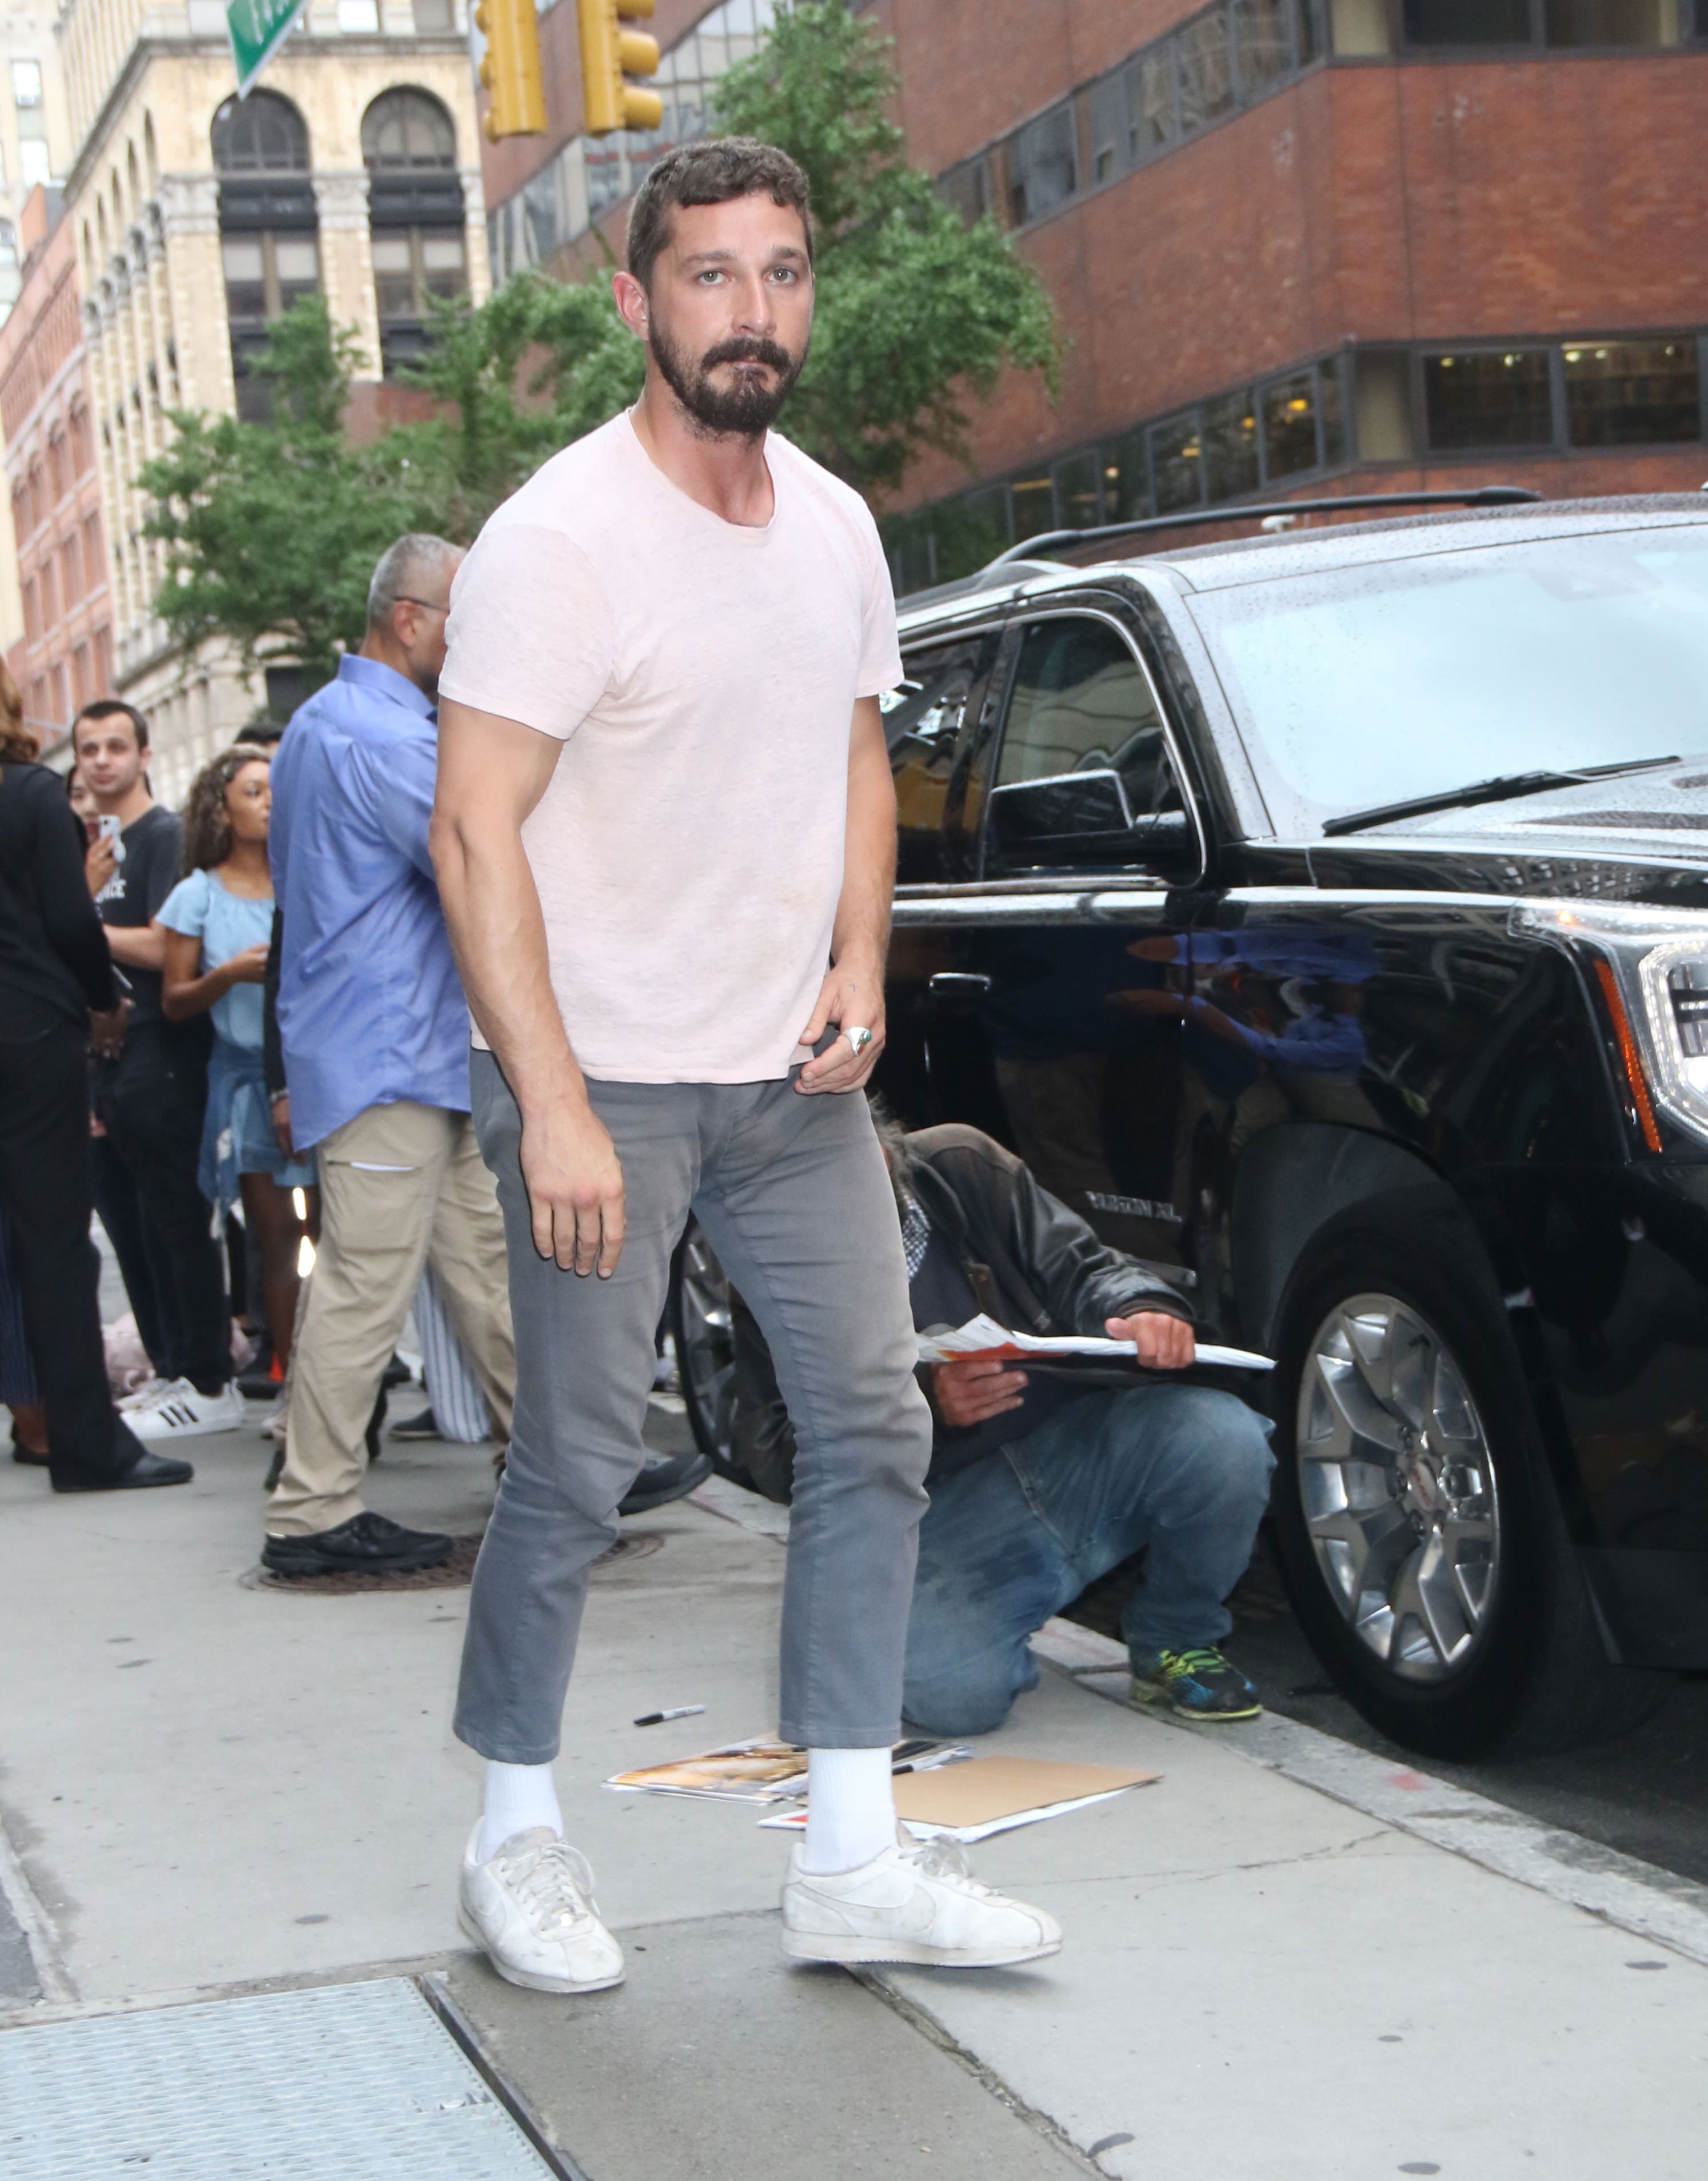 Jeans That Made Shia LaBeouf's Week